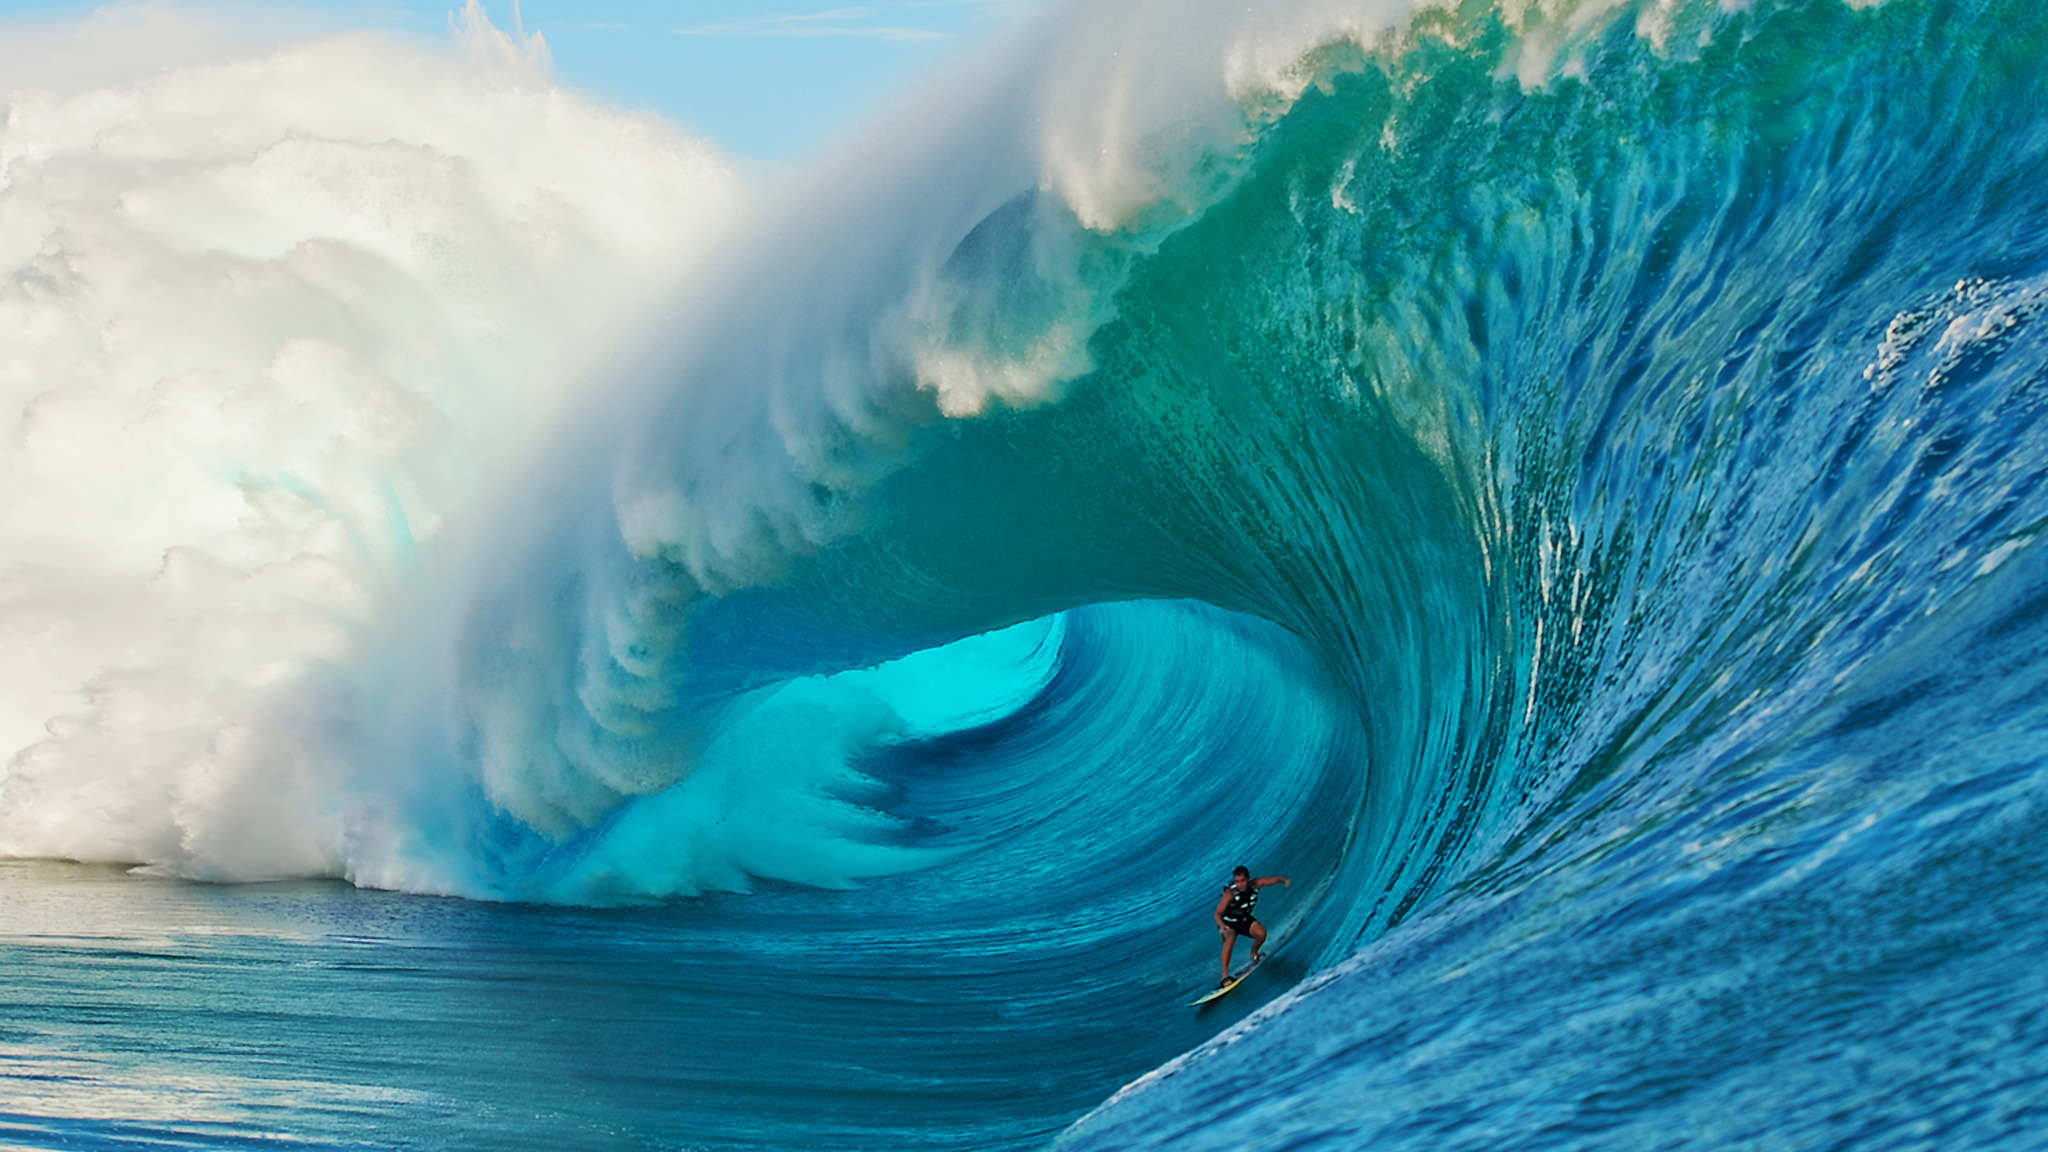 Mavericks. The World’s Scariest, Biggest Waves And Surf Spots